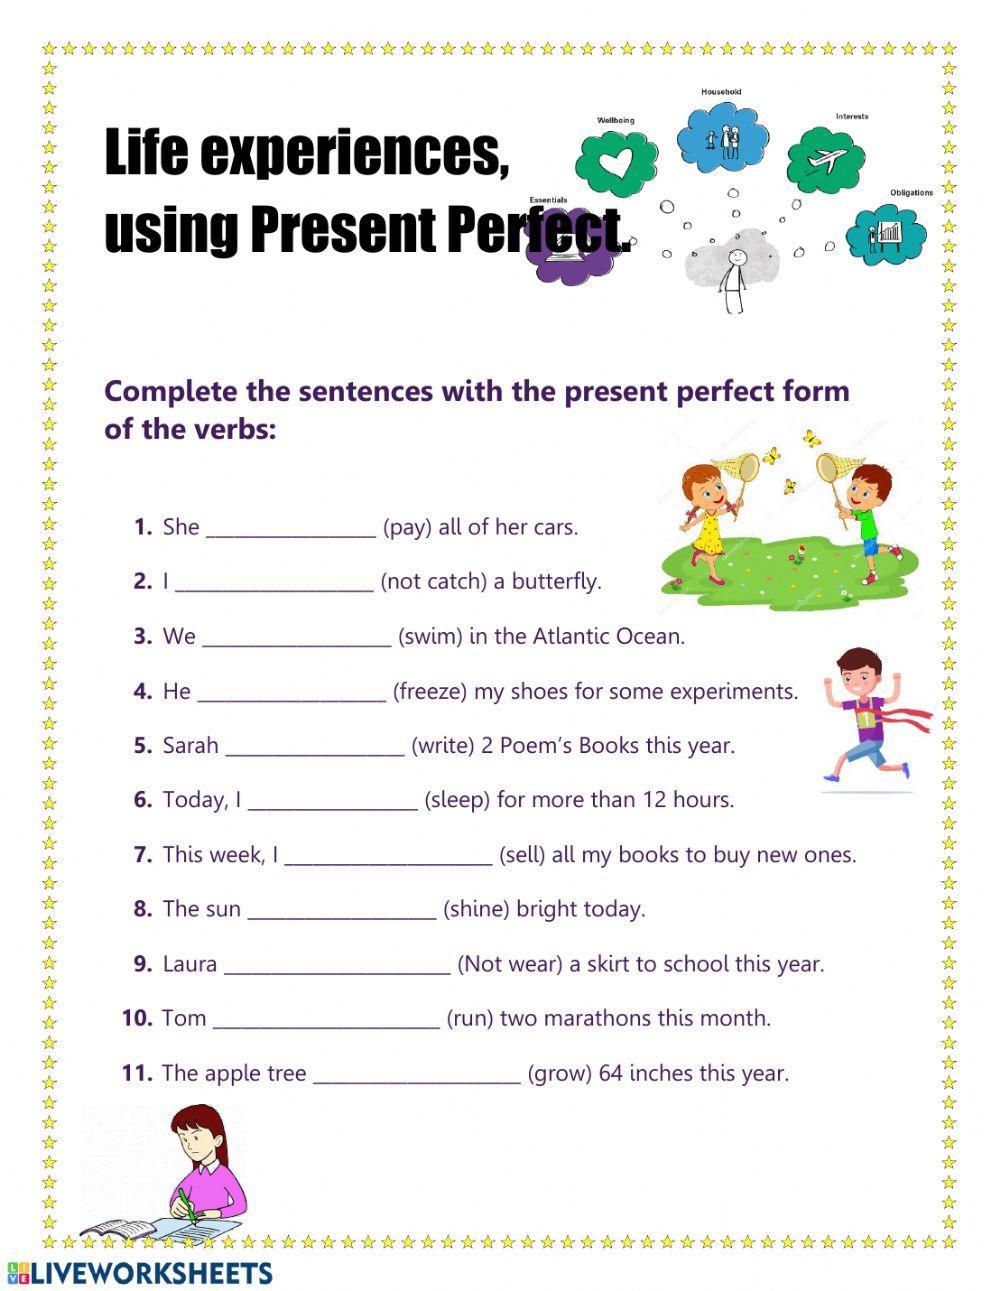 Life Experiences using Present Perfect